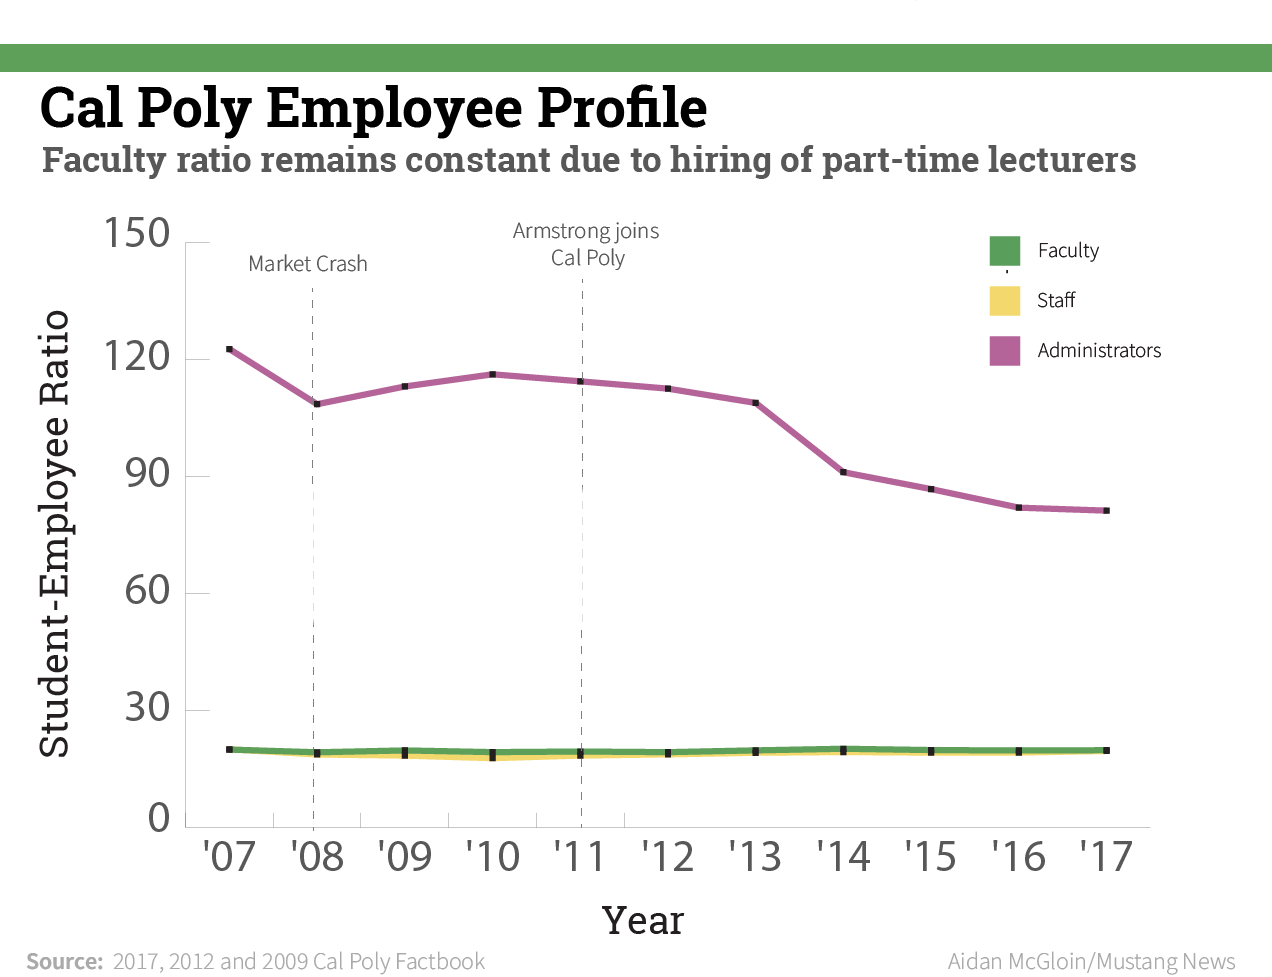 Administrators increased over time at Cal Poly